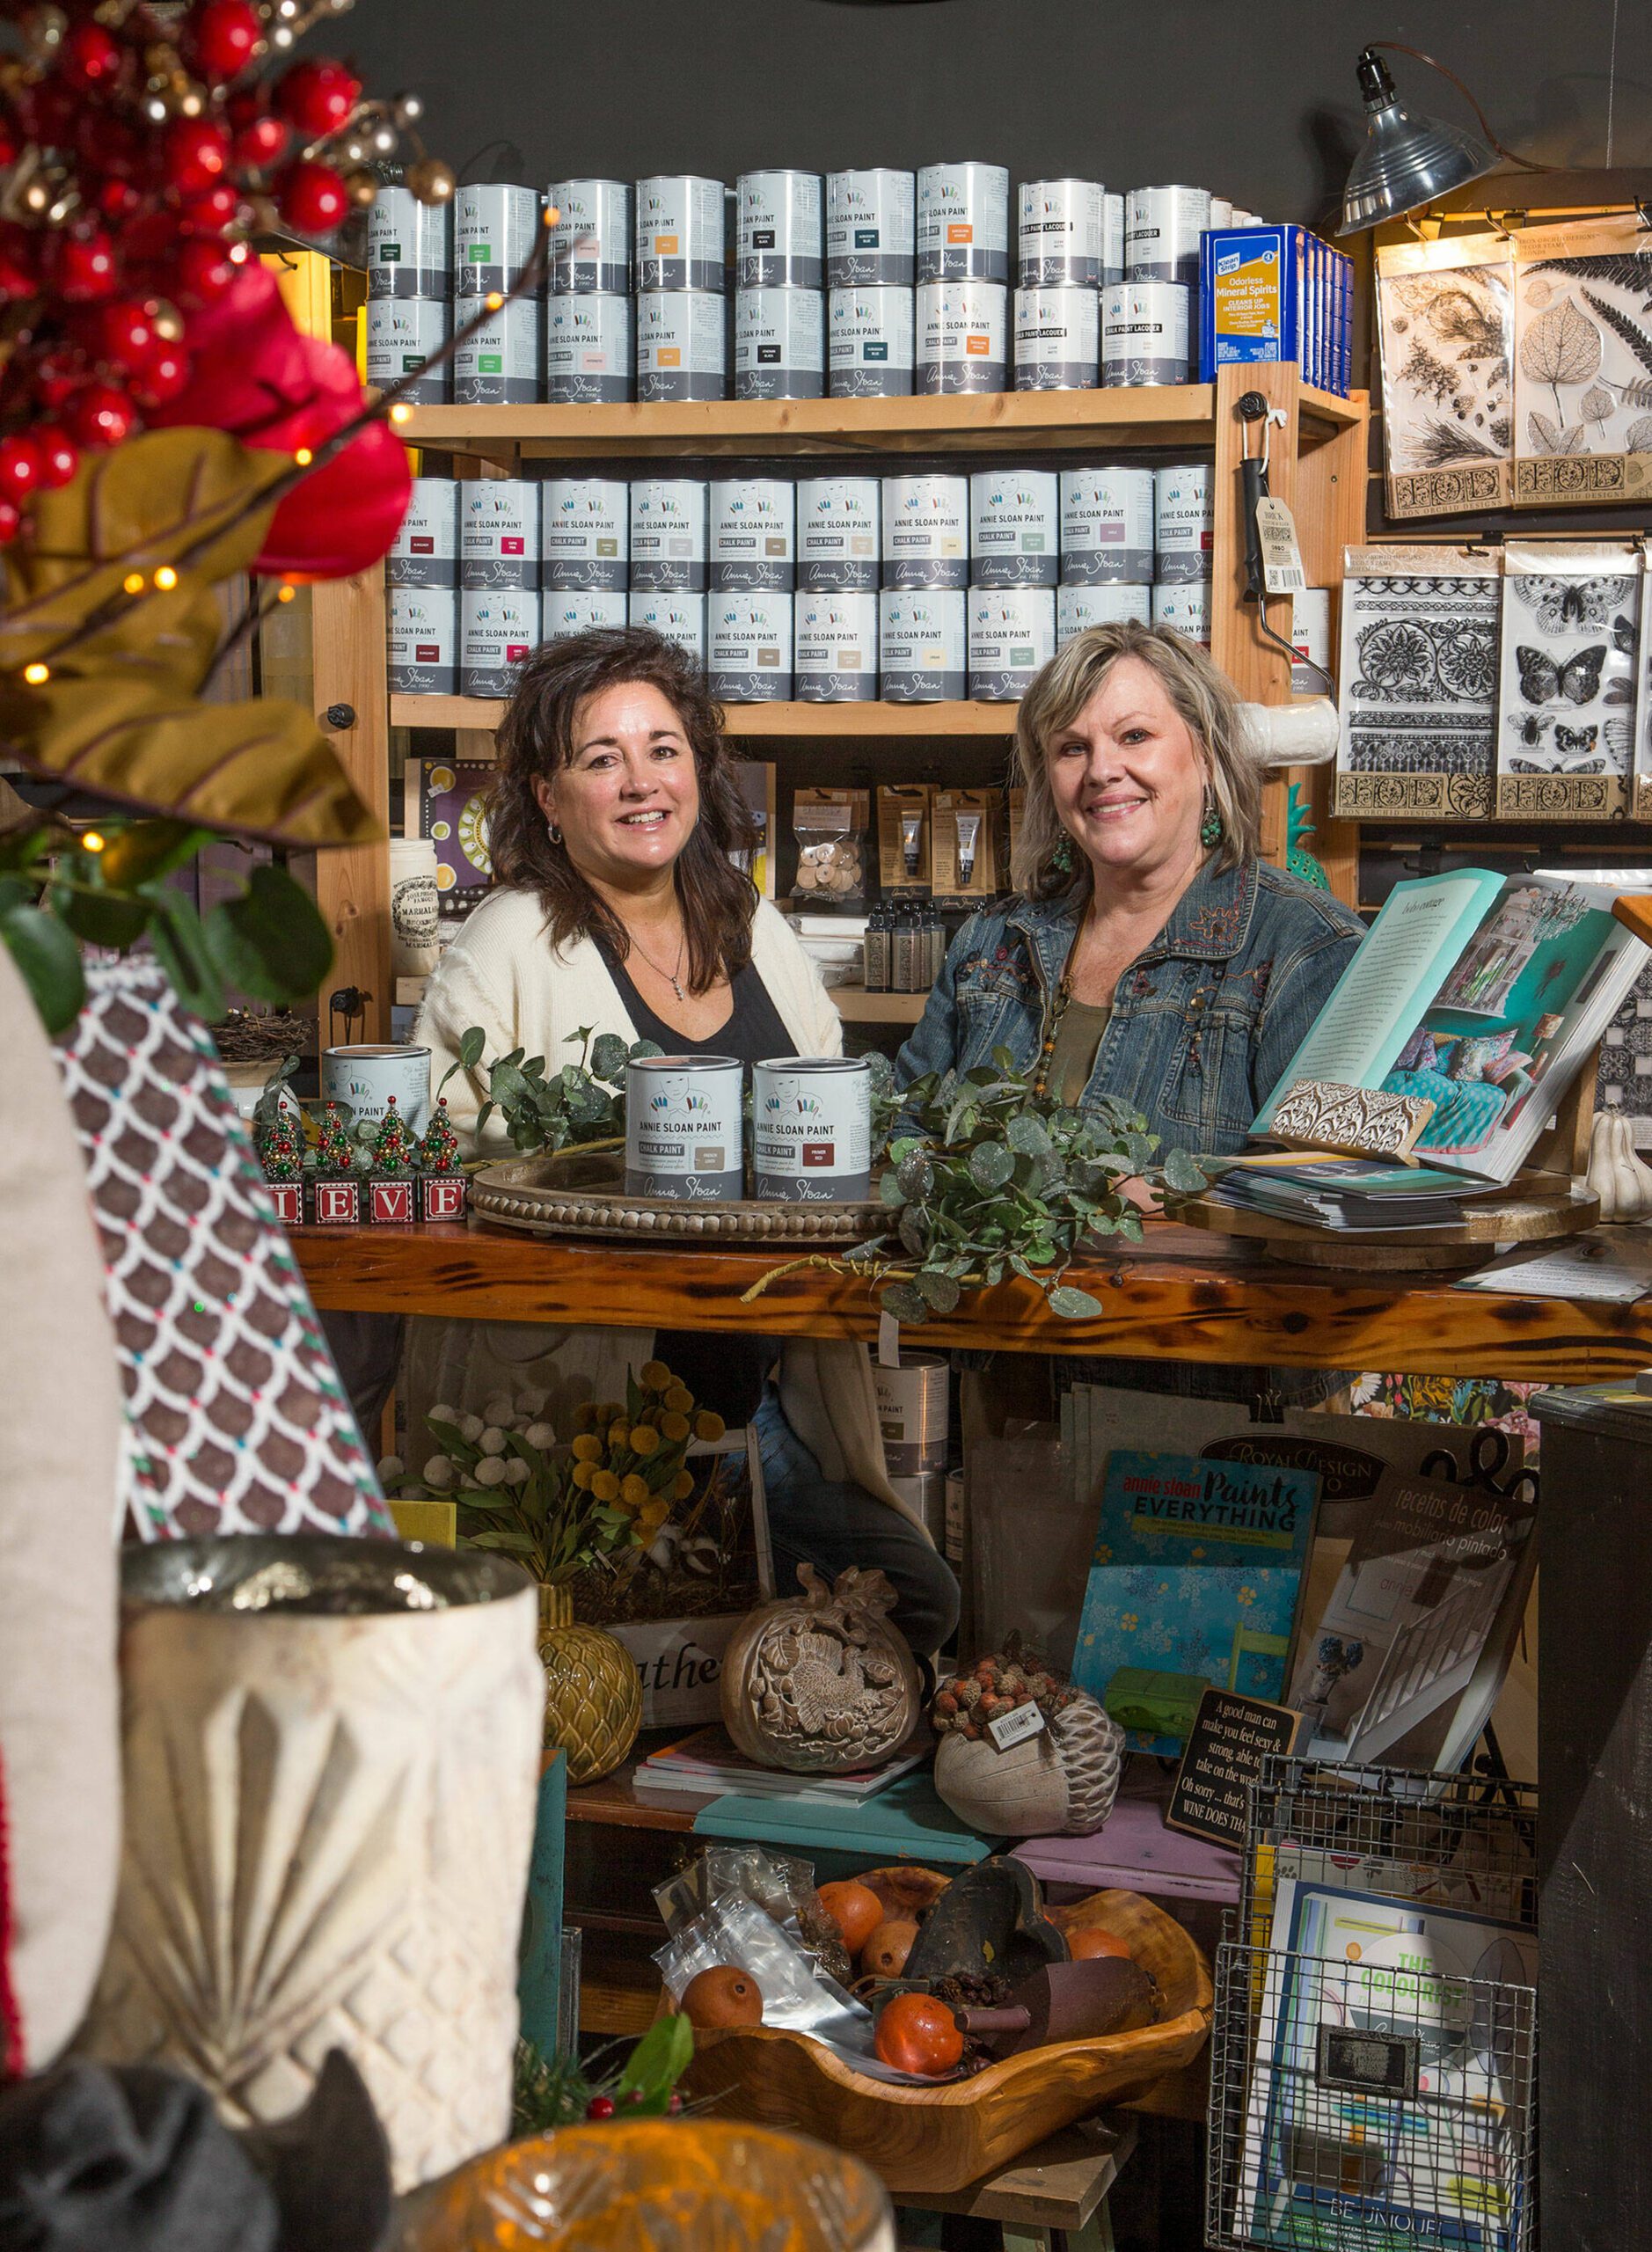 Owners of Country Rose/The Paint Bungalow, Donna Mains (left) and Kathleen Shalan in the shop on Wednesday, Oct. 27, 2021 in Arlington, Washington. The gift store also stocks Annie Sloan paint as well as being a women's apparel boutique. (Andy Bronson / The Herald)